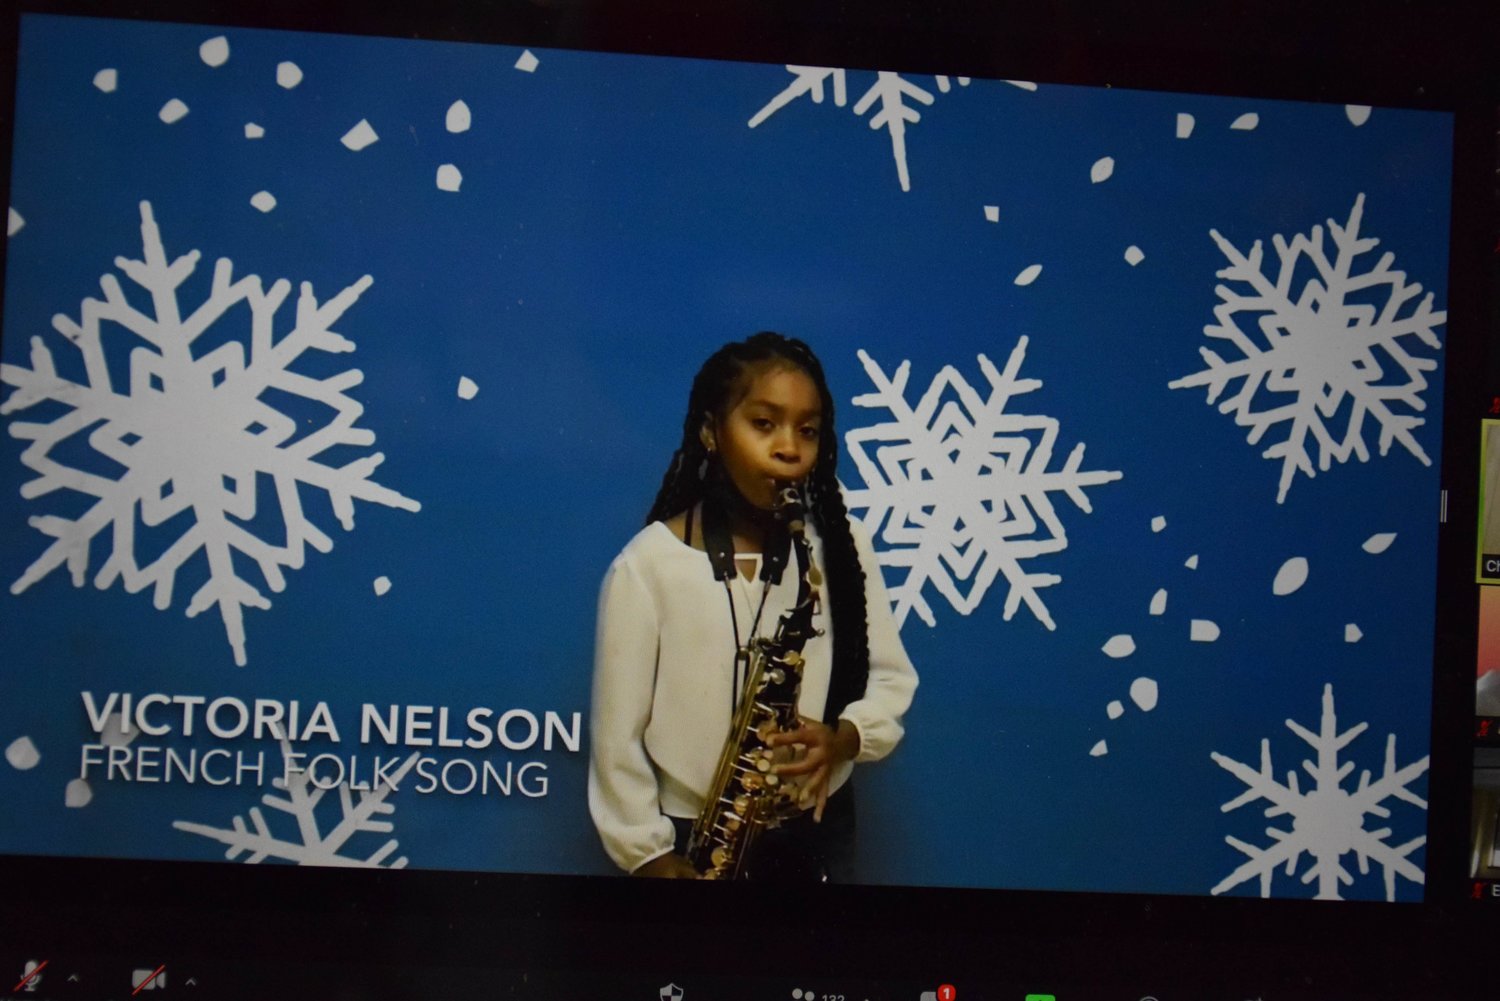 A video clip of Alden Terrace School student Victoria Nelson performing the saxophone was played during the Zoom event.